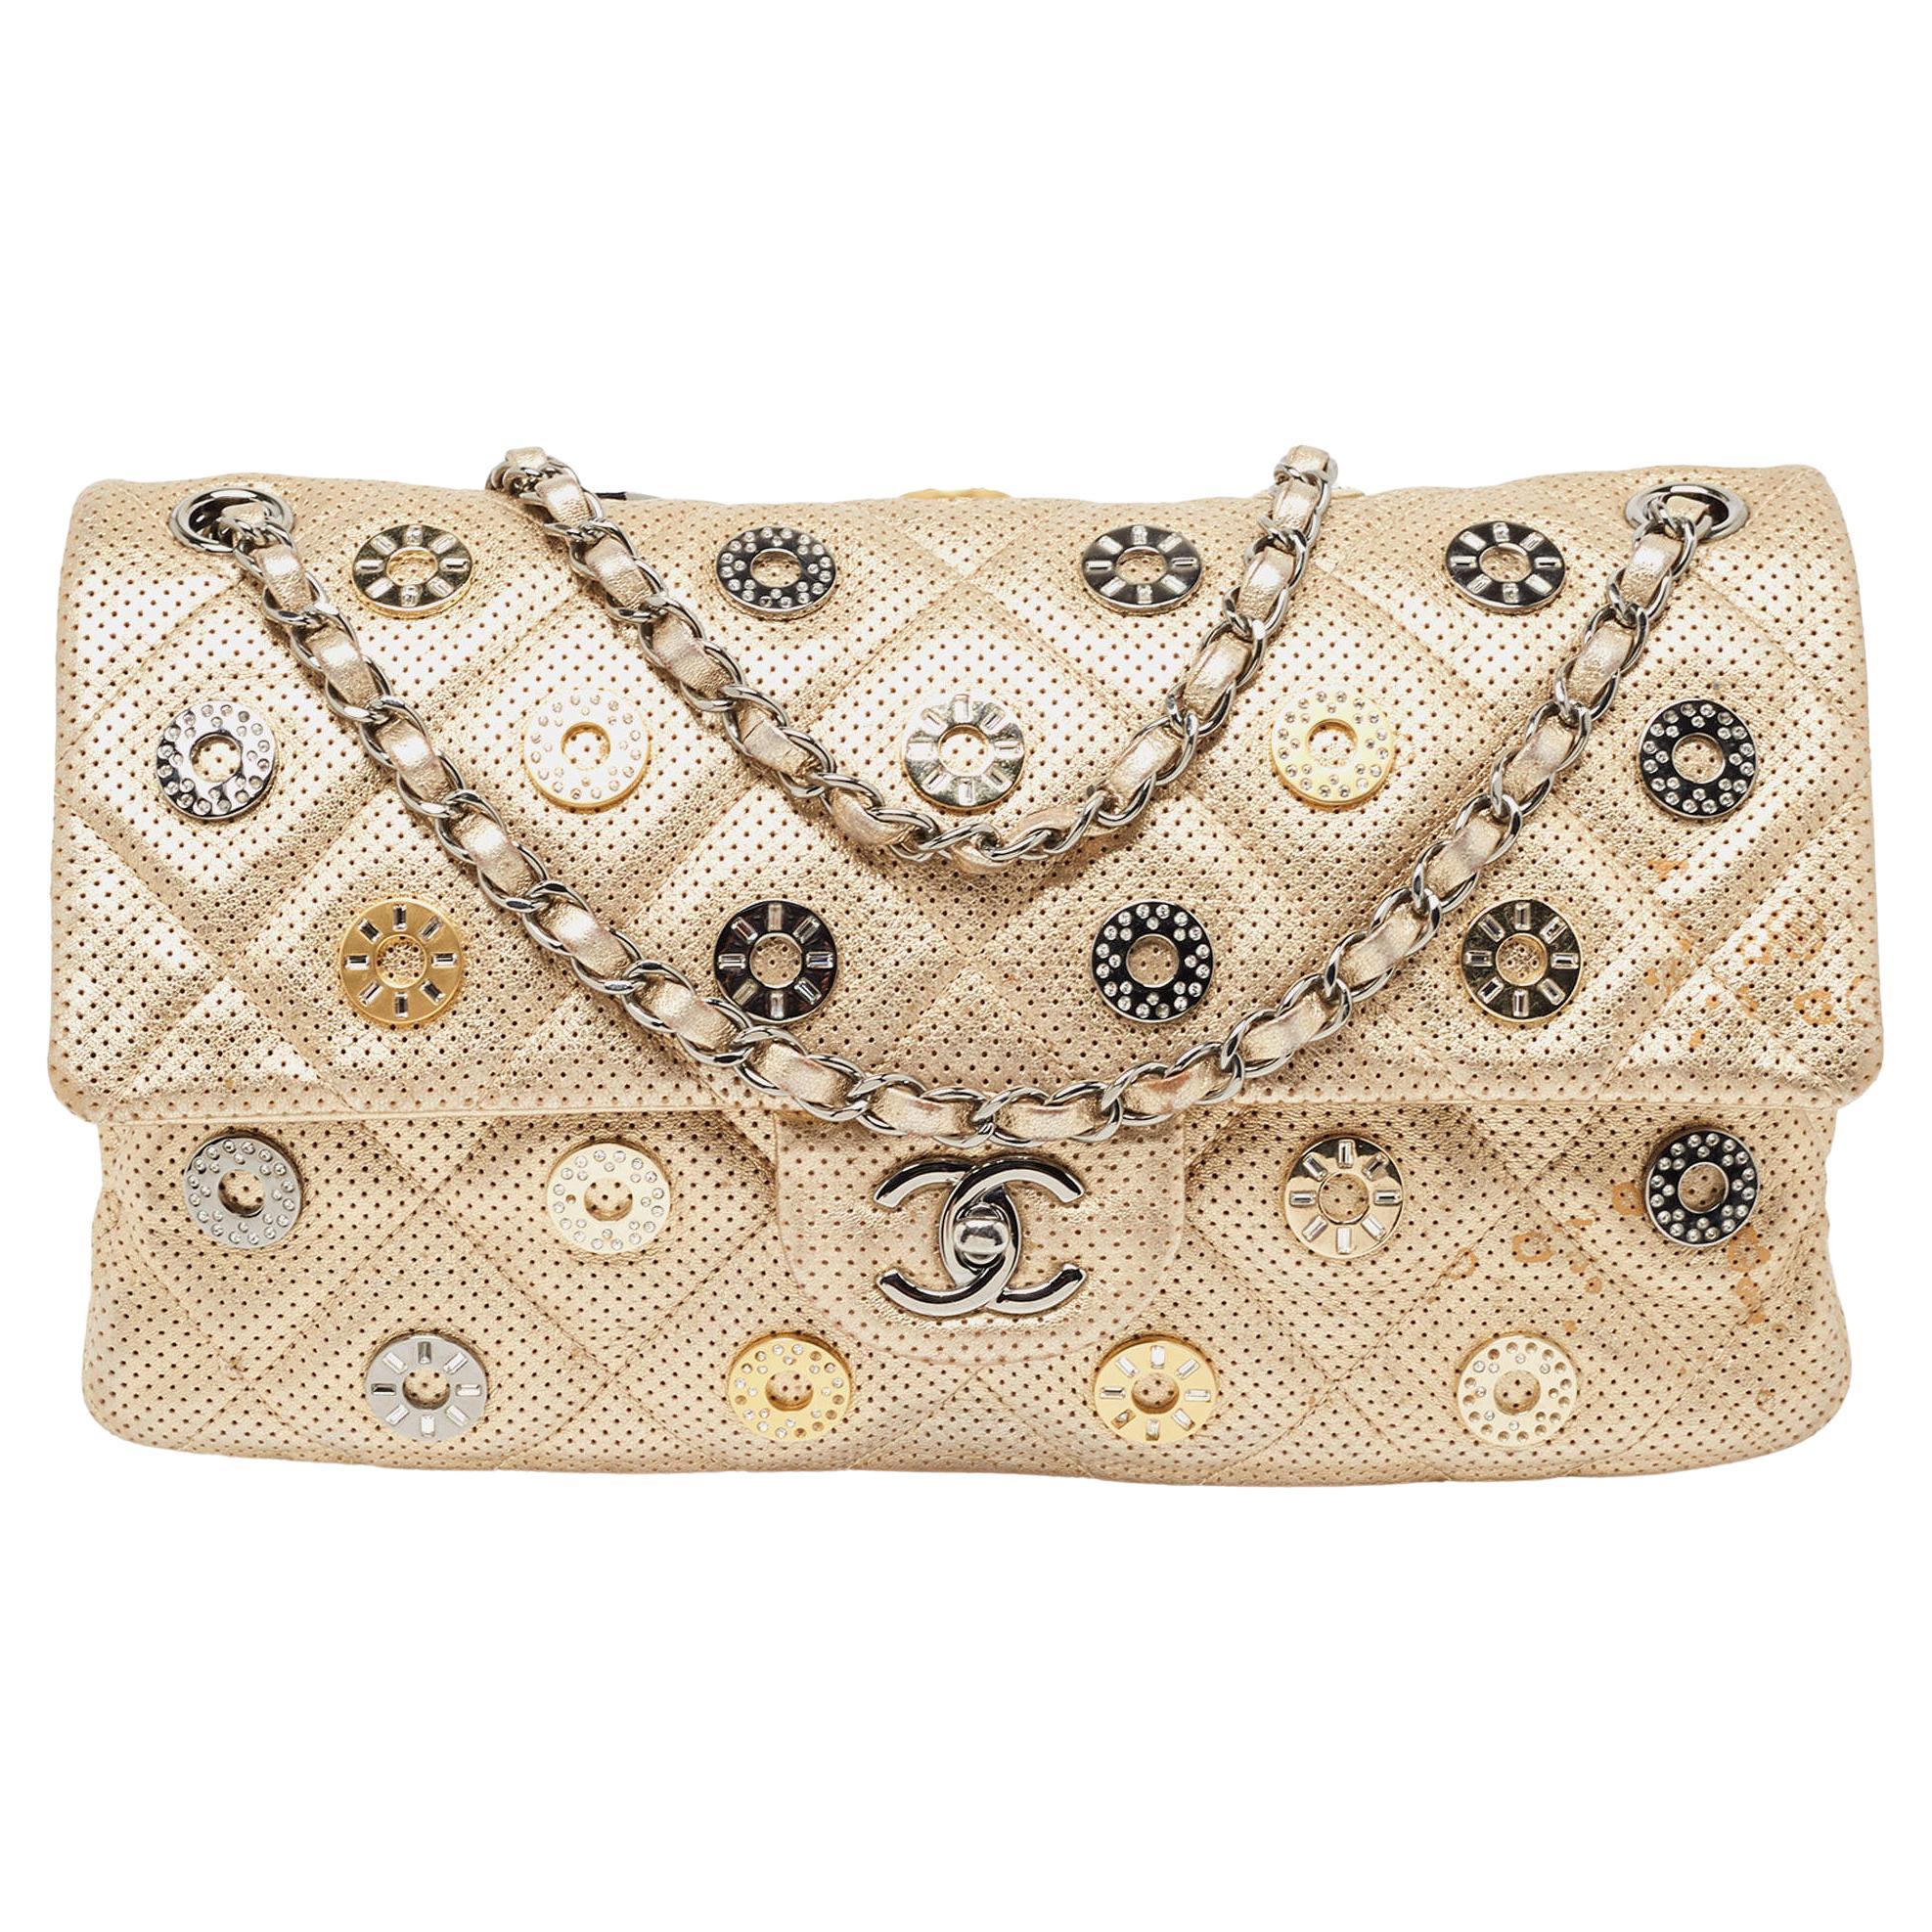 Chanel Gold Quilted Perforated Leather Embellished East/West Classic Flap Bag For Sale